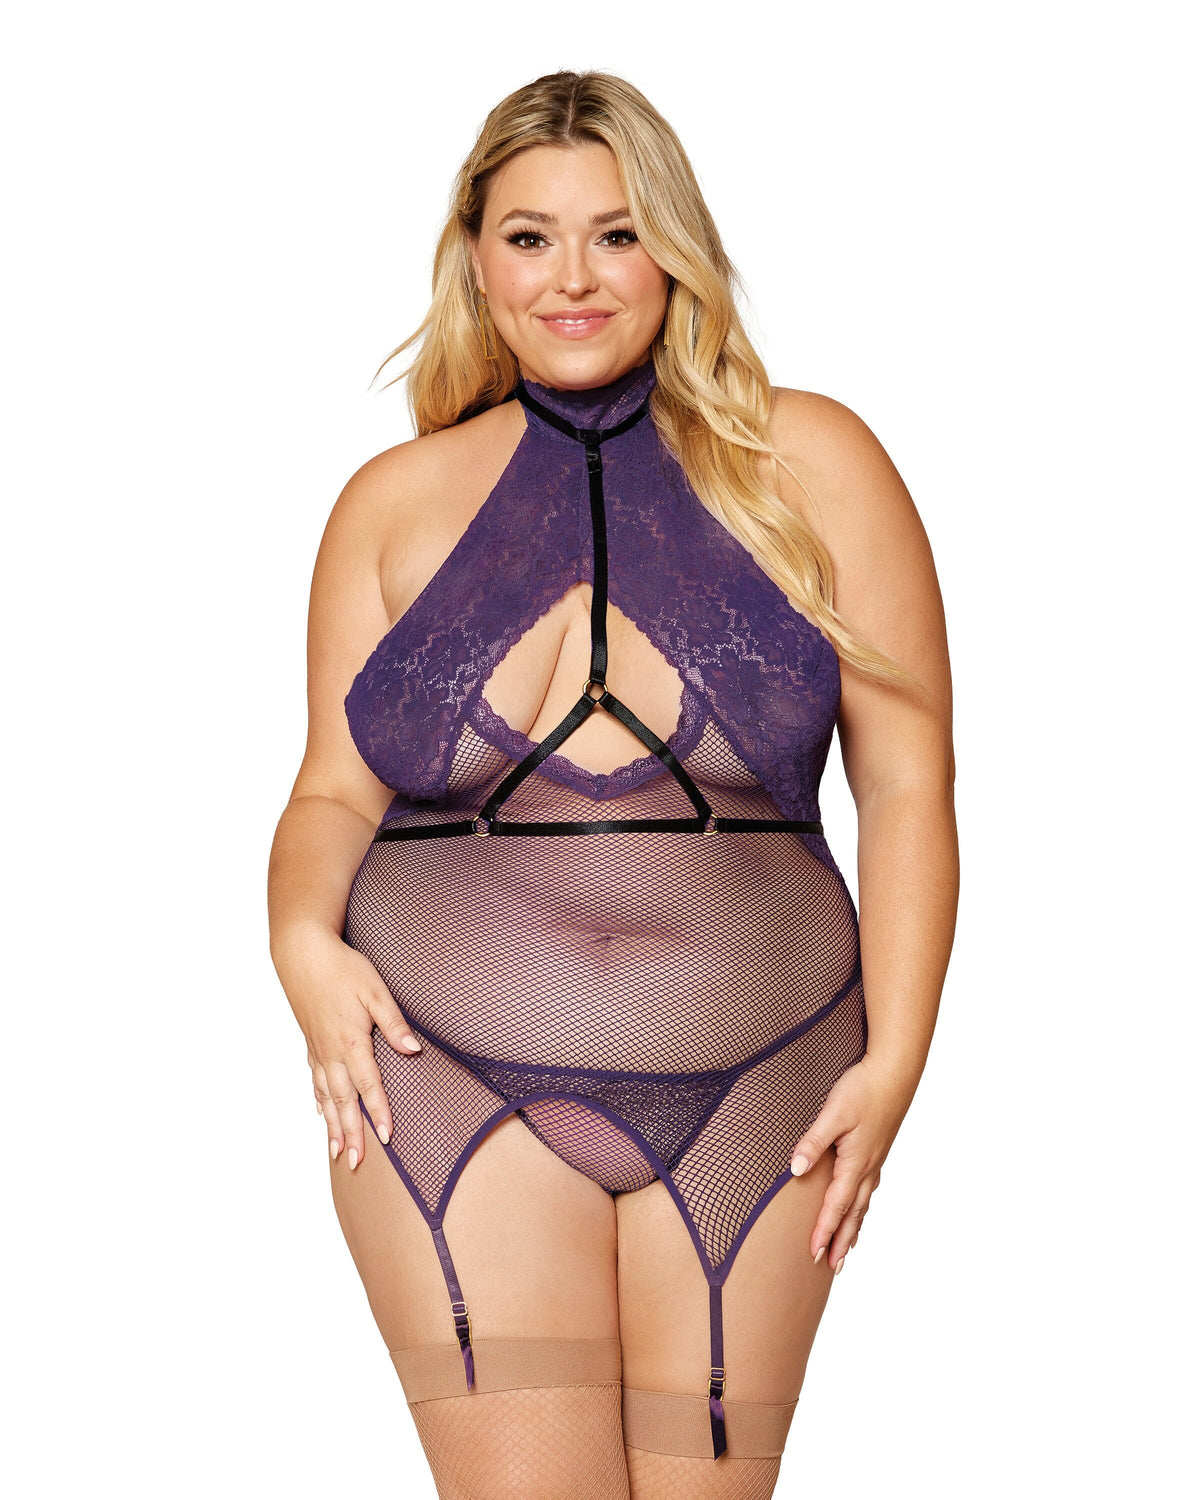 3-piece lace and fishnet garter slip, elastic harness and matching G-string set Lingerie Dreamgirl International OSQ Aubergine 